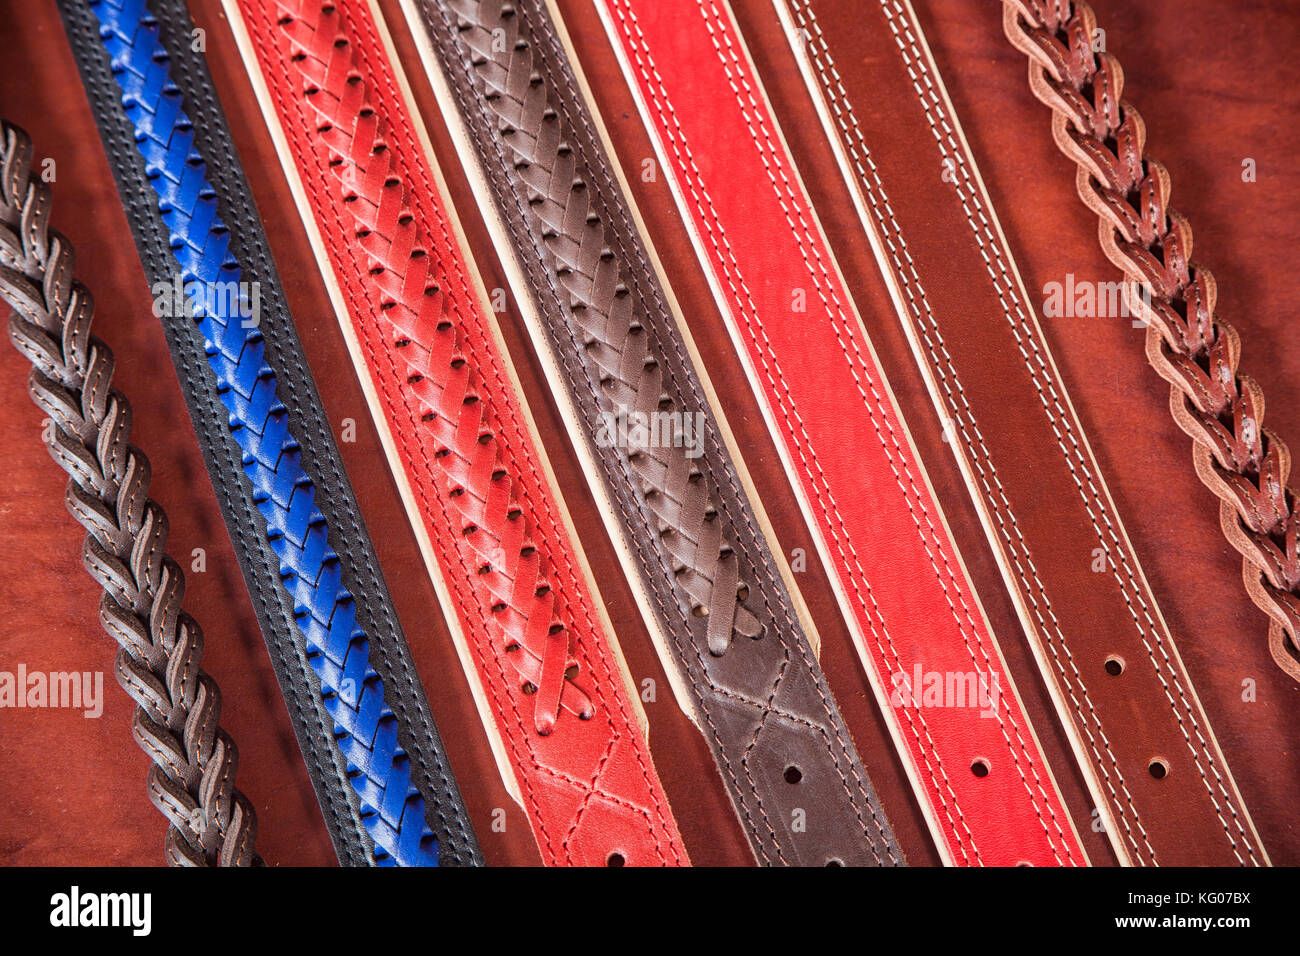 A close-up of narrow belts made of genuine red, blue and brown leather. Pattern made of leather belts Stock Photo